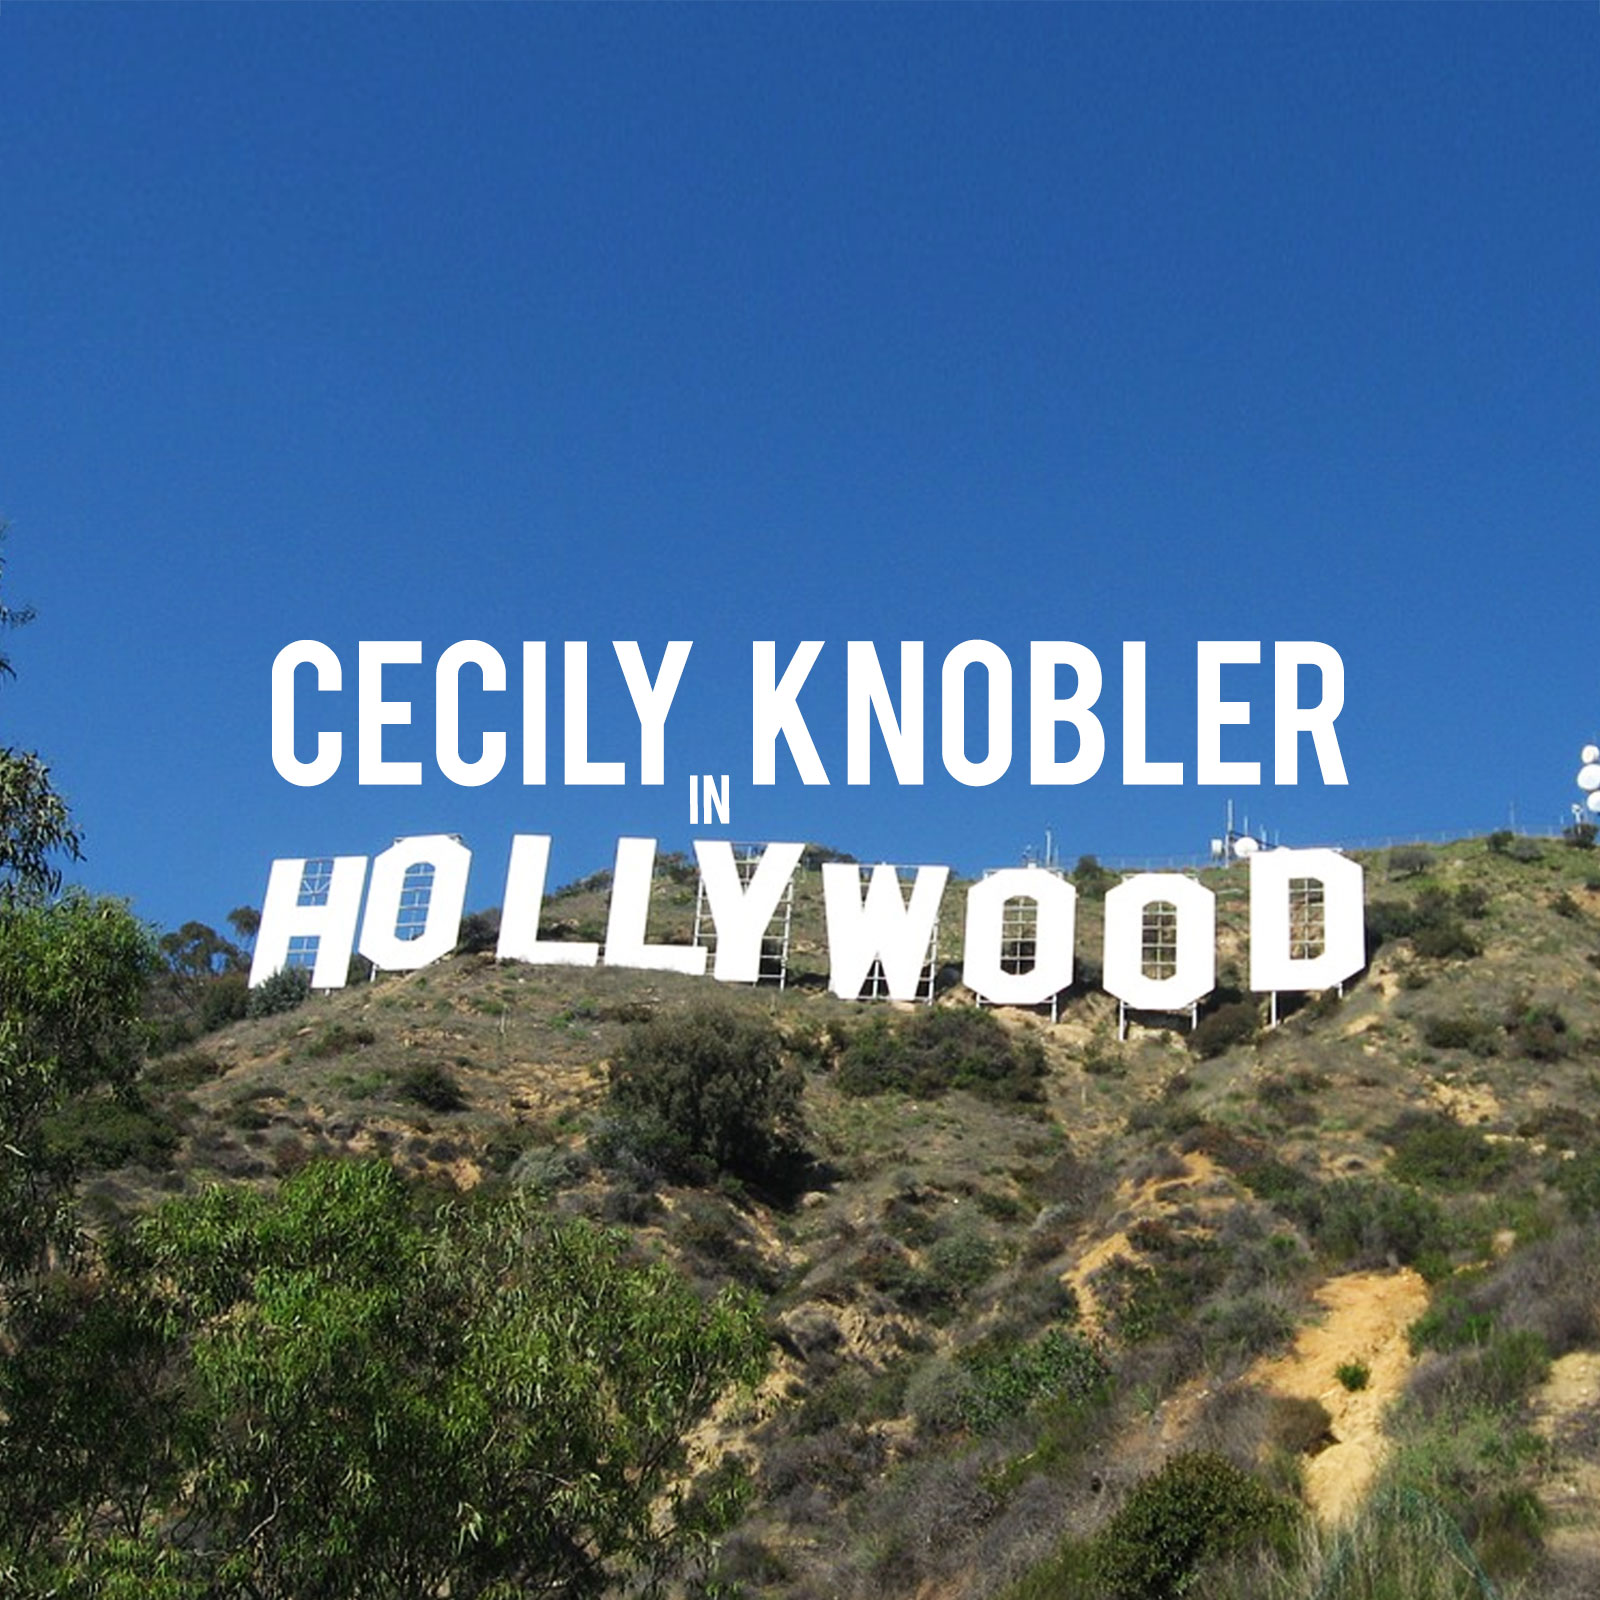 "A fun look at Nice and Mean Celebs from Cecily Knobler and More!!"